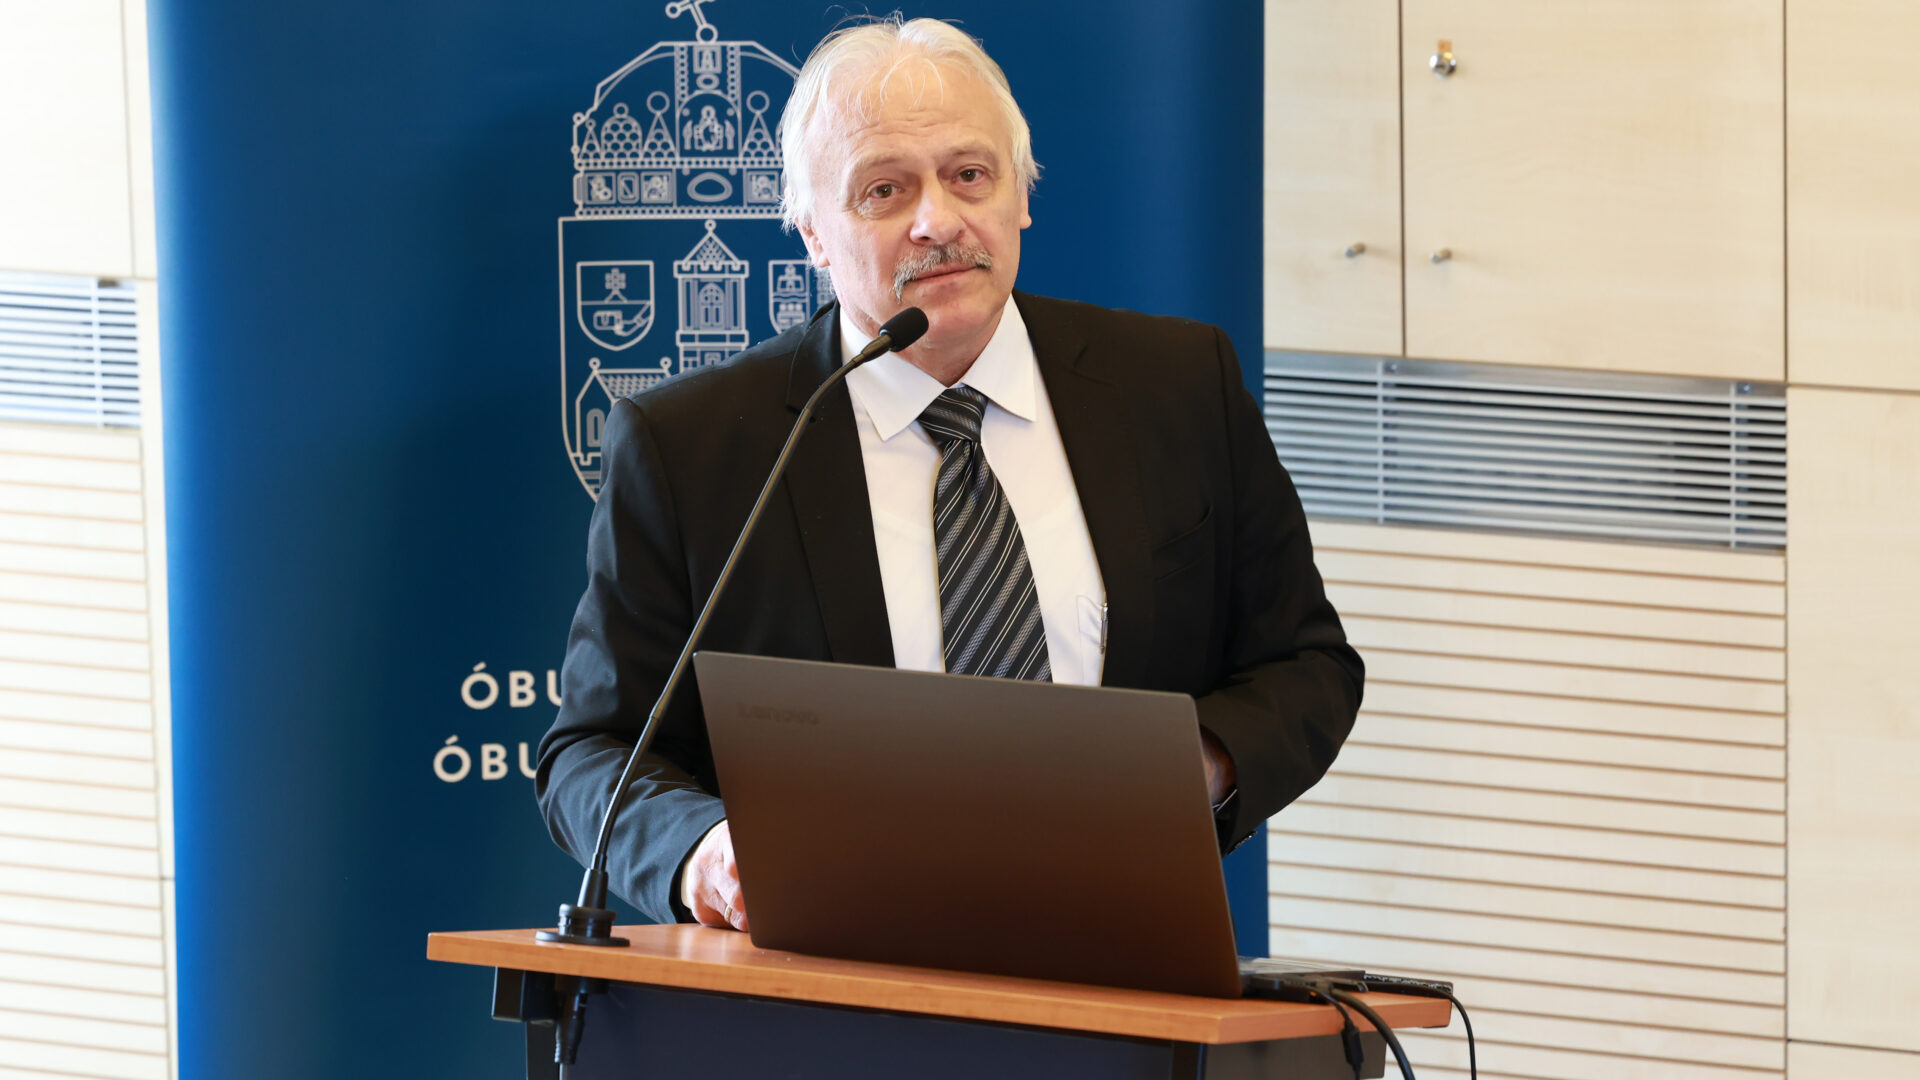 Dr. Zoltán Zábori, head of The National Office for Intellectual Property’s department.